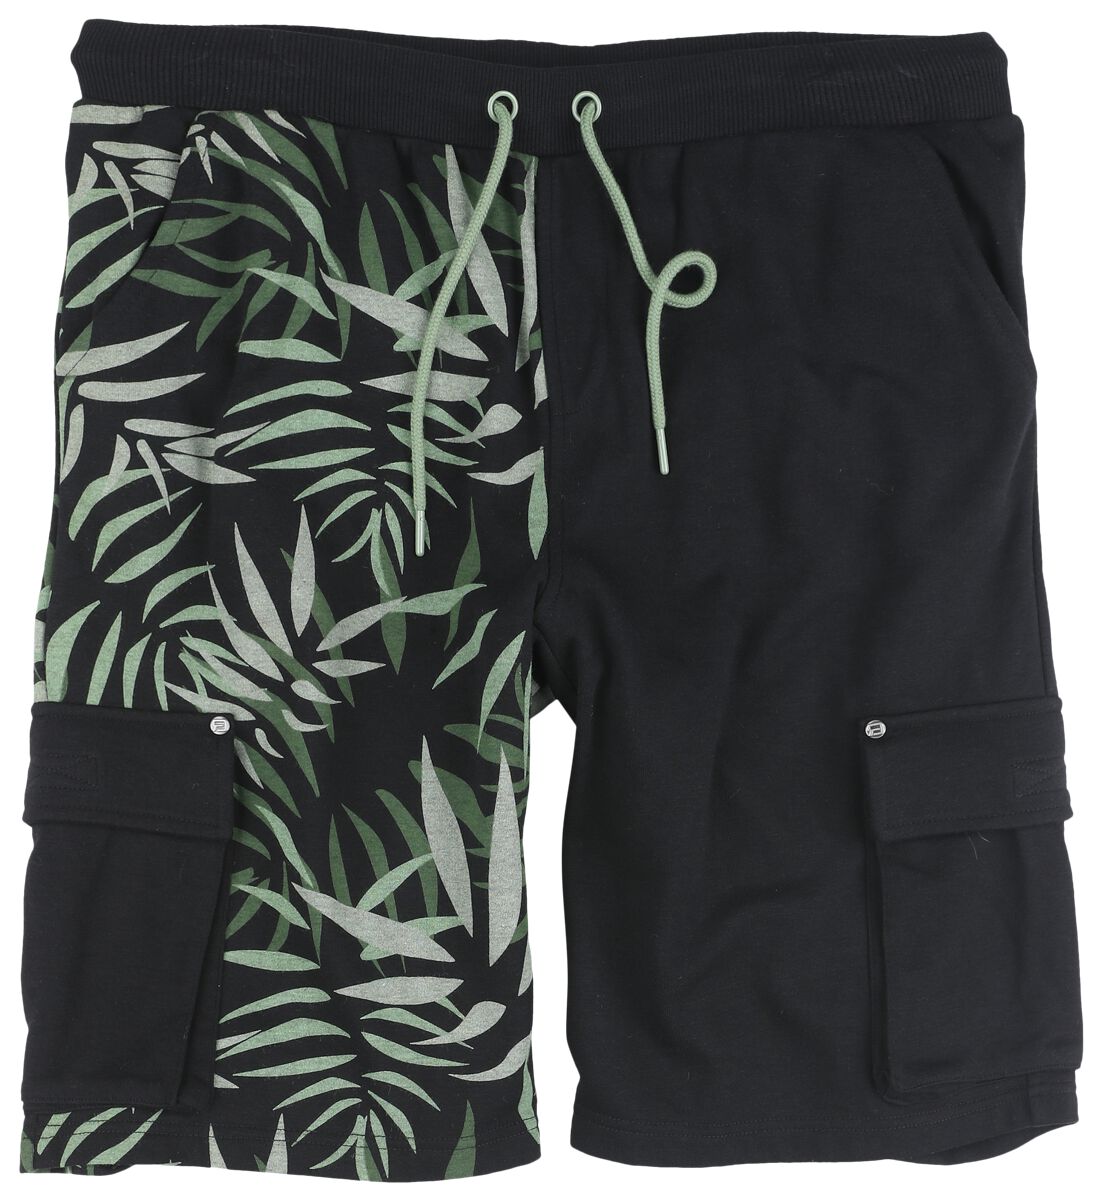 Image of Shorts di RED by EMP - Sweatshorts with tropical print - S a XXL - Uomo - nero